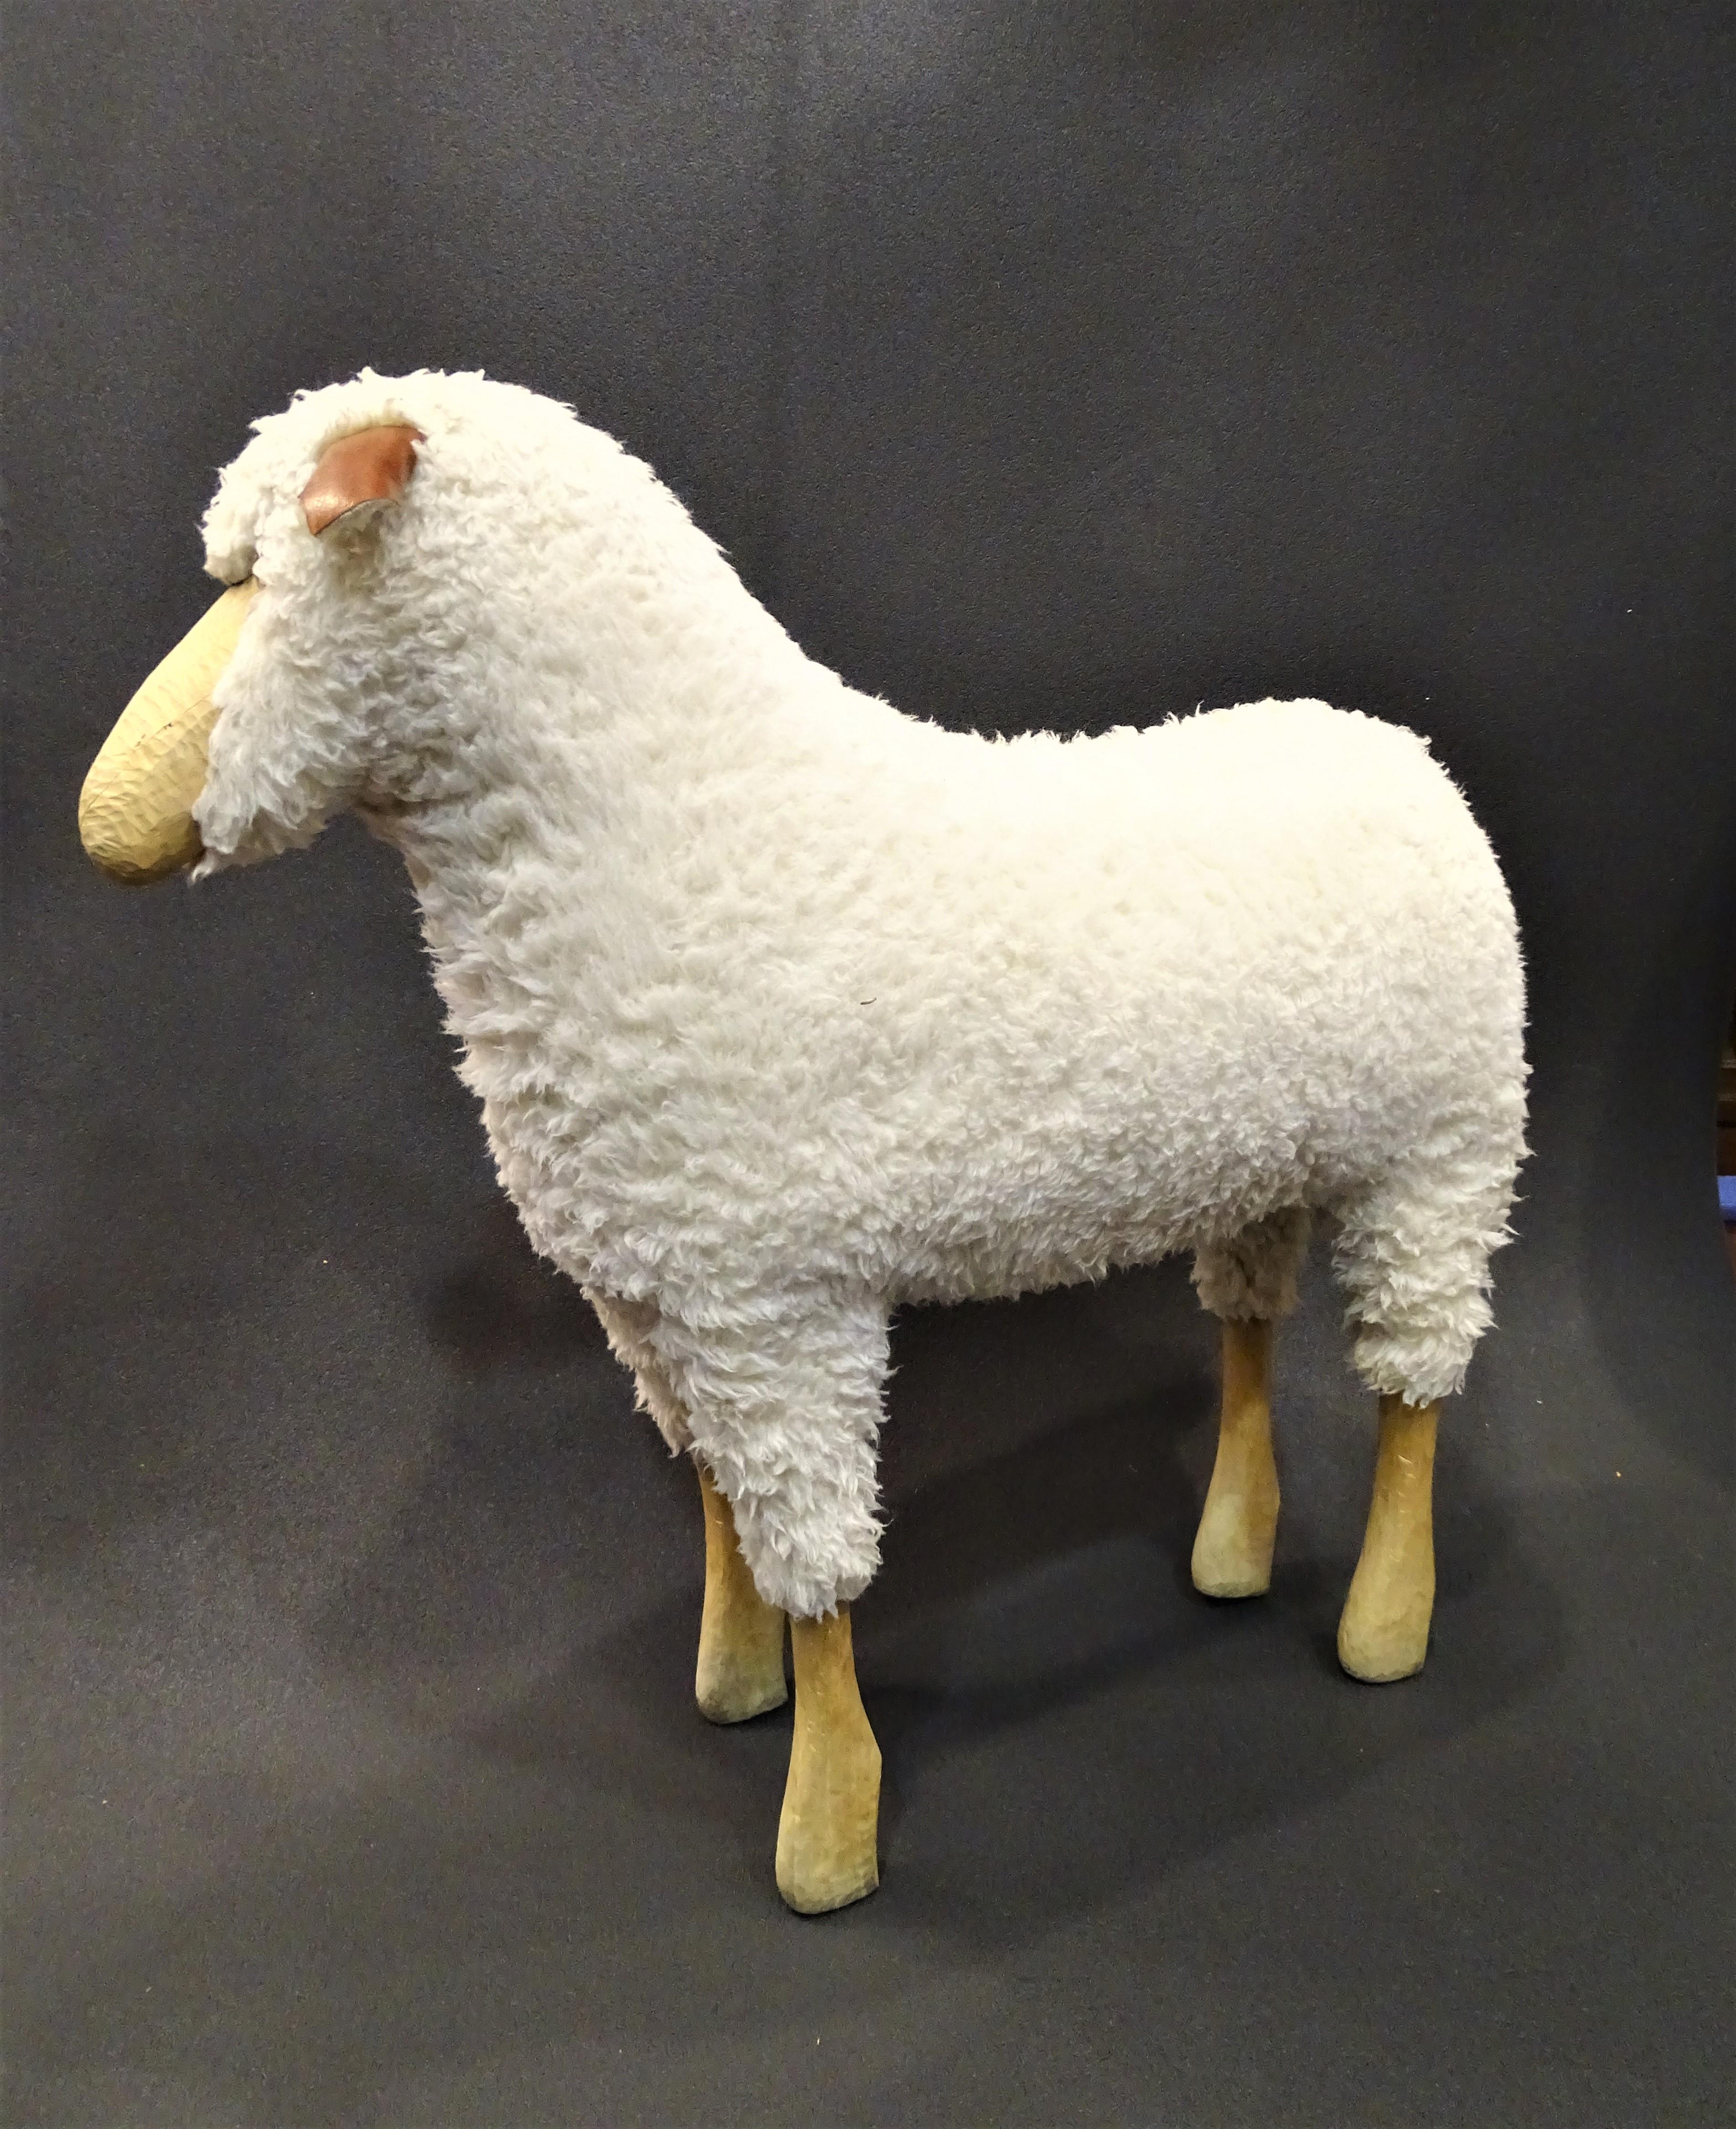 Gorgeous big stool sheep by Hamms-Peter Krafft, original ,80s, in a very good condition.
Beautifully made wooden sheep with real soft, fluffy sheepskin, made with beech legs, leather ears, sheepskin coat and glasseyes. The sheep is strong enough to